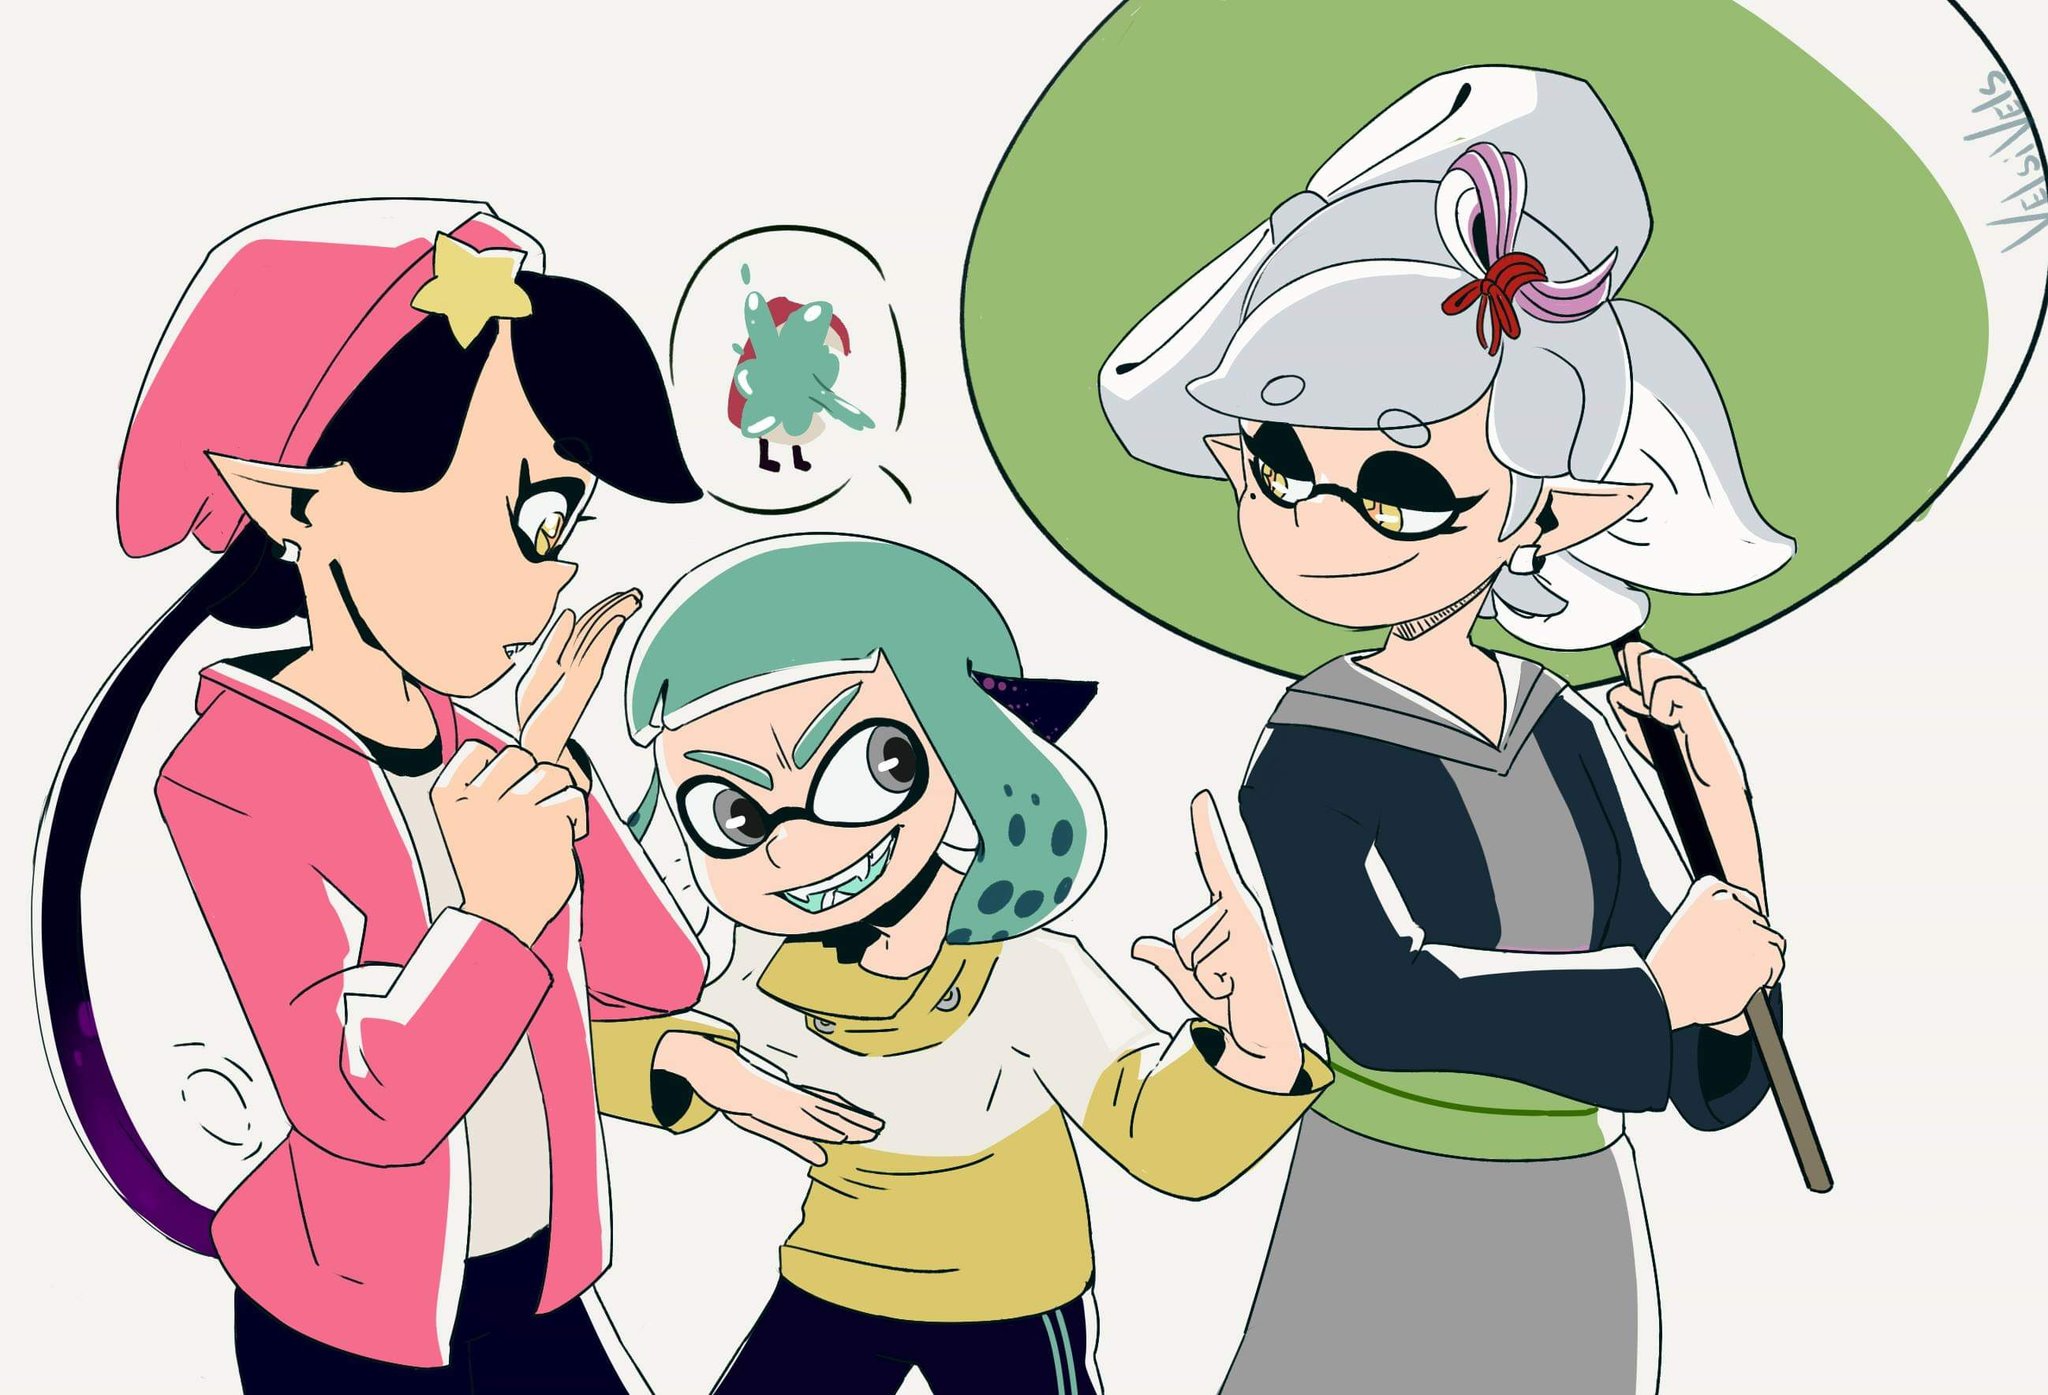 “Agent 4 telling about her adventures.

#squidsisters #Spla...